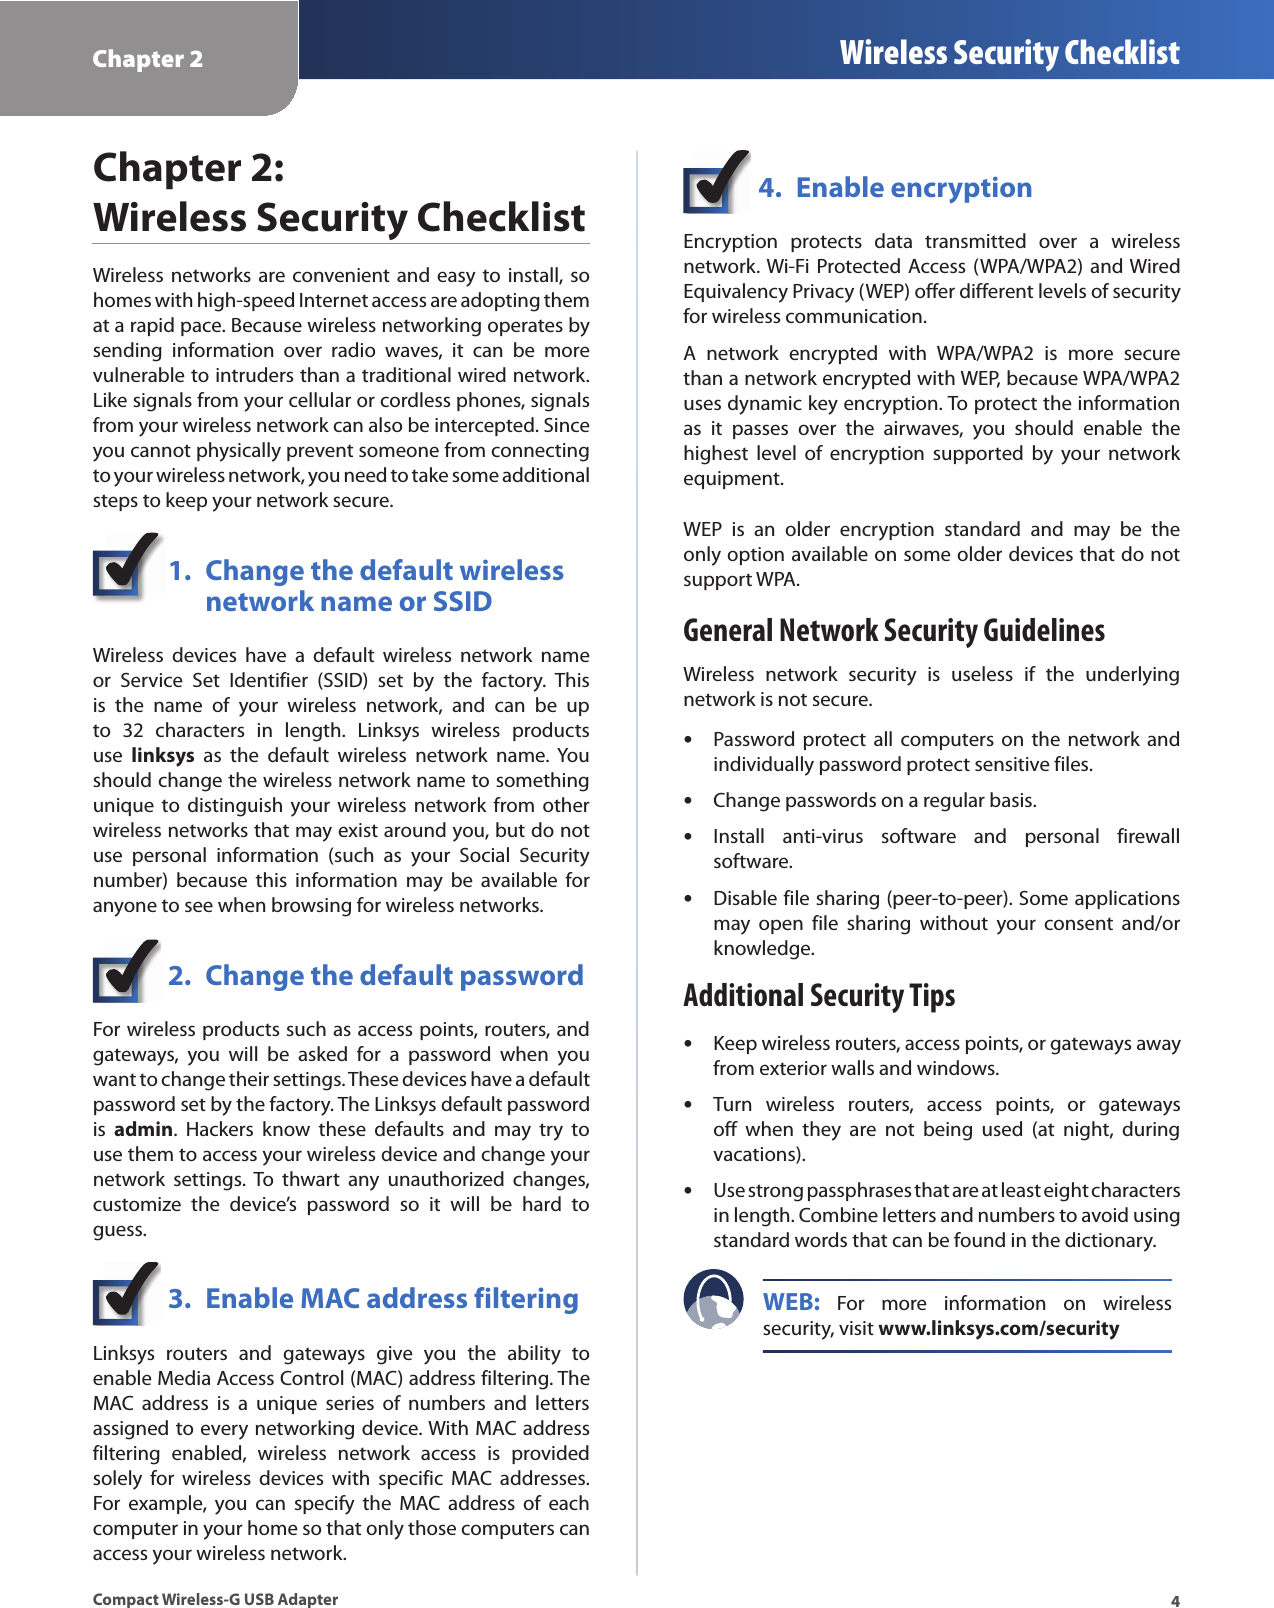 Chapter 2 Wireless Security Checklist4Compact Wireless-G USB AdapterChapter 2:  Wireless Security ChecklistWireless networks are convenient and easy  to install, so homes with high-speed Internet access are adopting them at a rapid pace. Because wireless networking operates by sending  information  over  radio  waves,  it  can  be  more vulnerable to intruders than a traditional wired network. Like signals from your cellular or cordless phones, signals from your wireless network can also be intercepted. Since you cannot physically prevent someone from connecting to your wireless network, you need to take some additional steps to keep your network secure. 1.  Change the default wireless    network name or SSIDWireless  devices  have  a  default  wireless  network  name or  Service  Set  Identifier  (SSID)  set  by  the  factory.  This is  the  name  of  your  wireless  network,  and  can  be  up to  32  characters  in  length.  Linksys  wireless  products use  linksys  as  the  default  wireless  network  name.  You should change the wireless network name to something unique  to  distinguish  your  wireless  network  from  other wireless networks that may exist around you, but do not use  personal  information  (such  as  your  Social  Security number)  because  this  information  may  be  available  for anyone to see when browsing for wireless networks. 2.  Change the default passwordFor wireless products such as access points, routers, and gateways,  you  will  be  asked  for  a  password  when  you want to change their settings. These devices have a default password set by the factory. The Linksys default password is  admin.  Hackers  know  these  defaults  and  may  try  to use them to access your wireless device and change your network  settings.  To  thwart  any  unauthorized  changes, customize  the  device’s  password  so  it  will  be  hard  to guess.3.  Enable MAC address filteringLinksys  routers  and  gateways  give  you  the  ability  to enable Media Access Control (MAC) address filtering. The MAC  address  is  a  unique  series  of  numbers  and  letters assigned to every networking device. With MAC address filtering  enabled,  wireless  network  access  is  provided solely  for  wireless  devices  with  specific  MAC  addresses. For  example,  you  can  specify  the  MAC  address  of  each computer in your home so that only those computers can access your wireless network. 4.  Enable encryptionEncryption  protects  data  transmitted  over  a  wireless network. Wi-Fi Protected Access (WPA/WPA2)  and Wired Equivalency Privacy (WEP) offer different levels of security for wireless communication.A  network  encrypted  with  WPA/WPA2  is  more  secure than a network encrypted with WEP, because WPA/WPA2 uses dynamic key encryption. To protect the information as  it  passes  over  the  airwaves,  you  should  enable  the highest  level  of  encryption  supported  by  your  network equipment. WEP  is  an  older  encryption  standard  and  may  be  the only option available on some older devices that do not support WPA.General Network Security GuidelinesWireless  network  security  is  useless  if  the  underlying network is not secure. Password protect  all  computers  on  the  network  and  sindividually password protect sensitive files.Change passwords on a regular basis. sInstall  anti-virus  software  and  personal  firewall  ssoftware.Disable file sharing (peer-to-peer). Some applications  smay  open  file  sharing  without  your  consent  and/or knowledge.Additional Security TipsKeep wireless routers, access points, or gateways away  sfrom exterior walls and windows.Turn  wireless  routers,  access  points,  or  gateways  soff  when  they  are  not  being  used  (at  night,  during vacations).Use strong passphrases that are at least eight characters  sin length. Combine letters and numbers to avoid using standard words that can be found in the dictionary. WEB:  For  more  information  on  wireless security, visit www.linksys.com/security